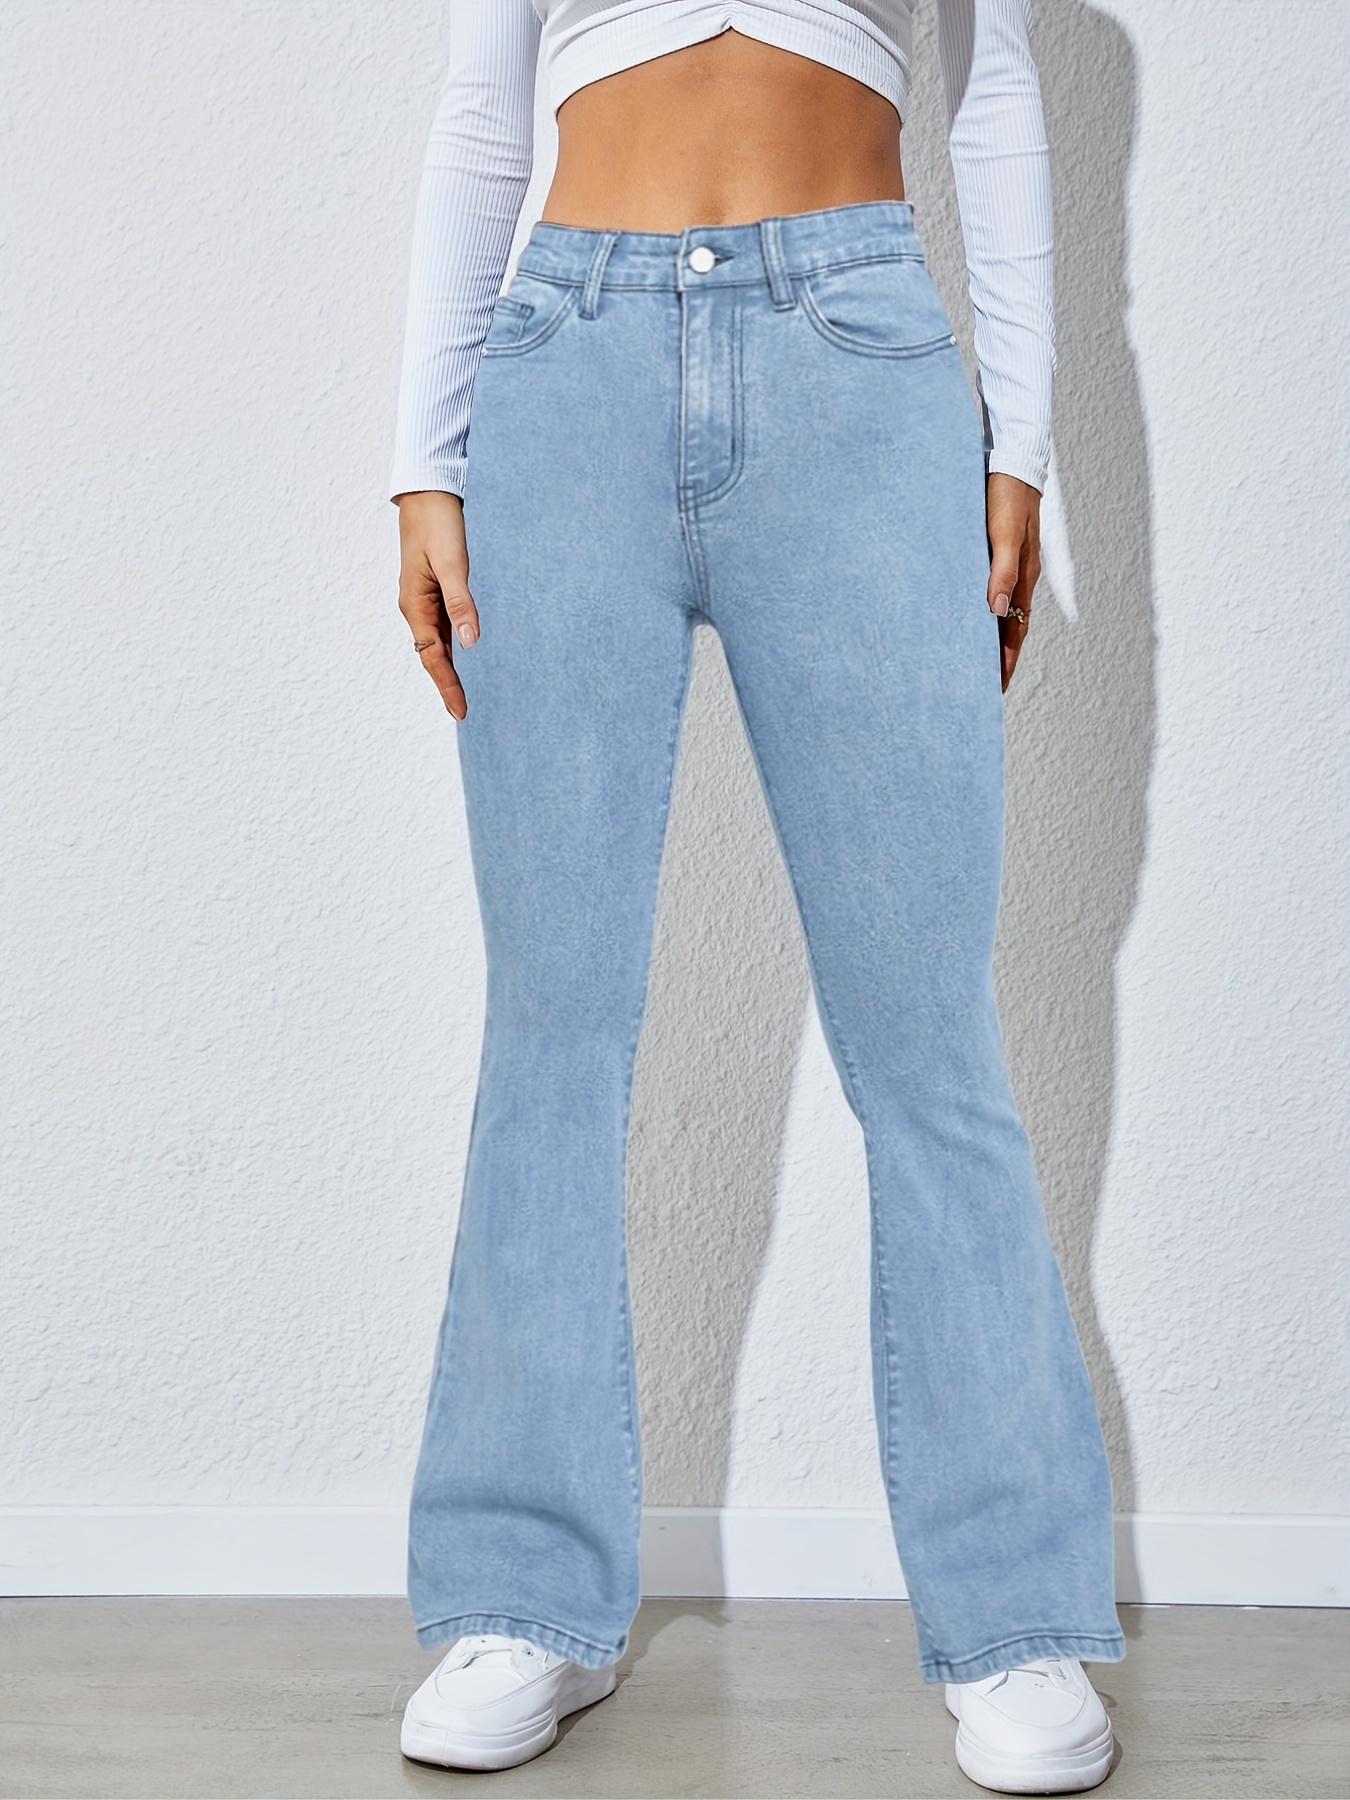 Flare / Bootcut jeans for women : Jeans flare women & bootcup